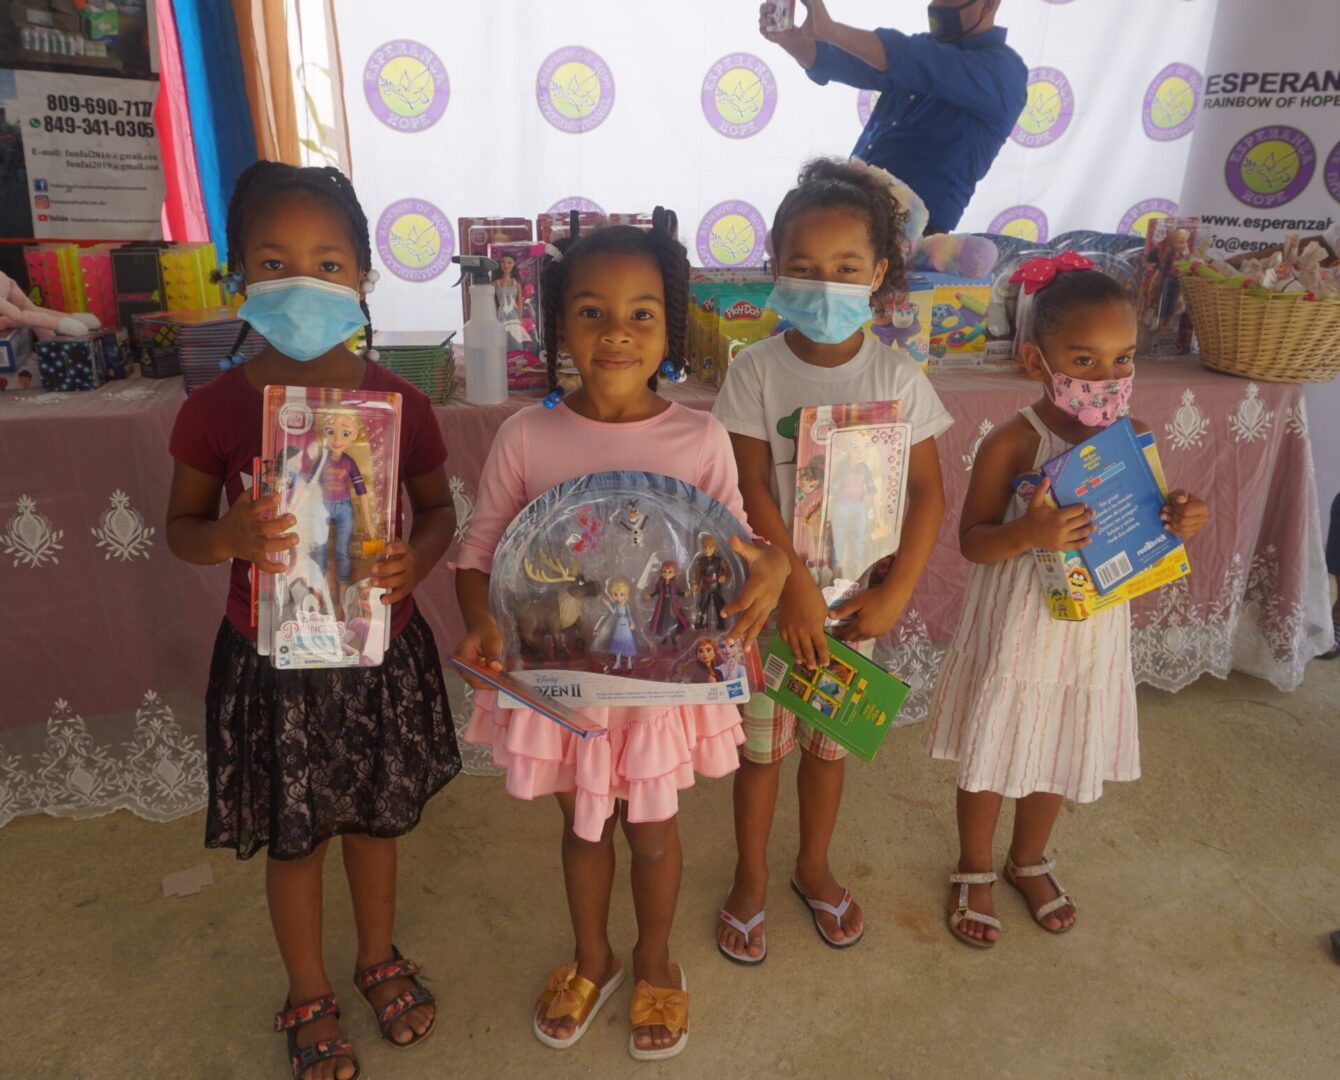 Four young girls, three wearing masks, holding books and toys